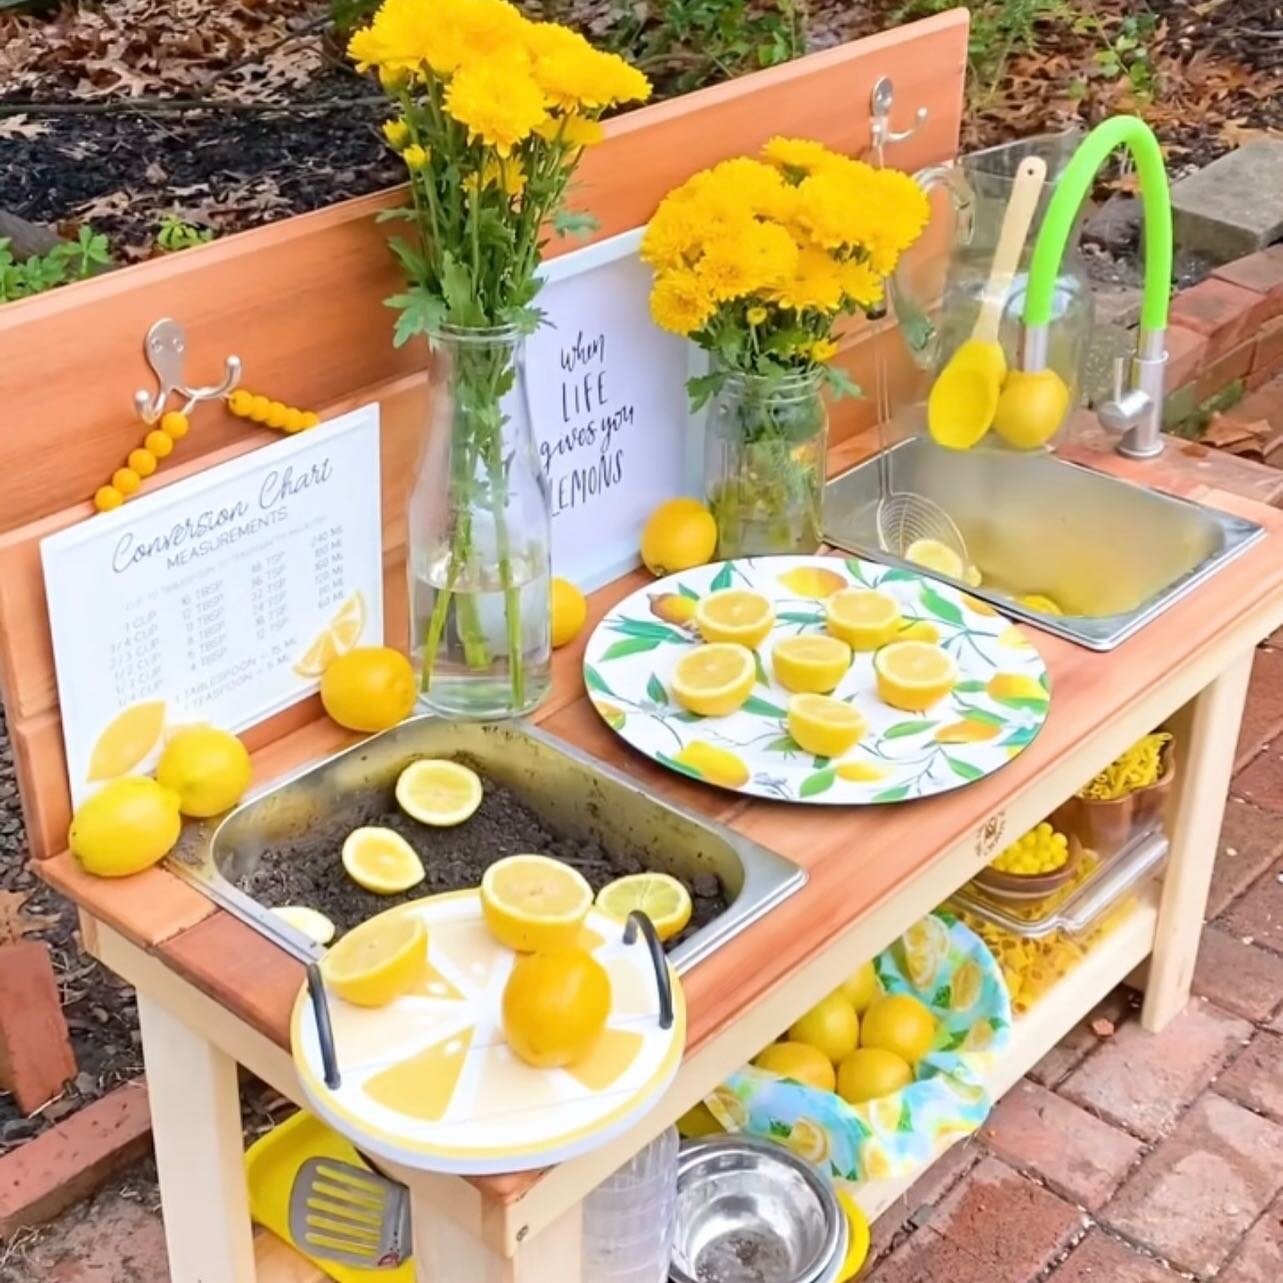 Check out this epic lemonade stand setup created by @livethescottcottage!! Wow!! 

📸 @livethescottcottage